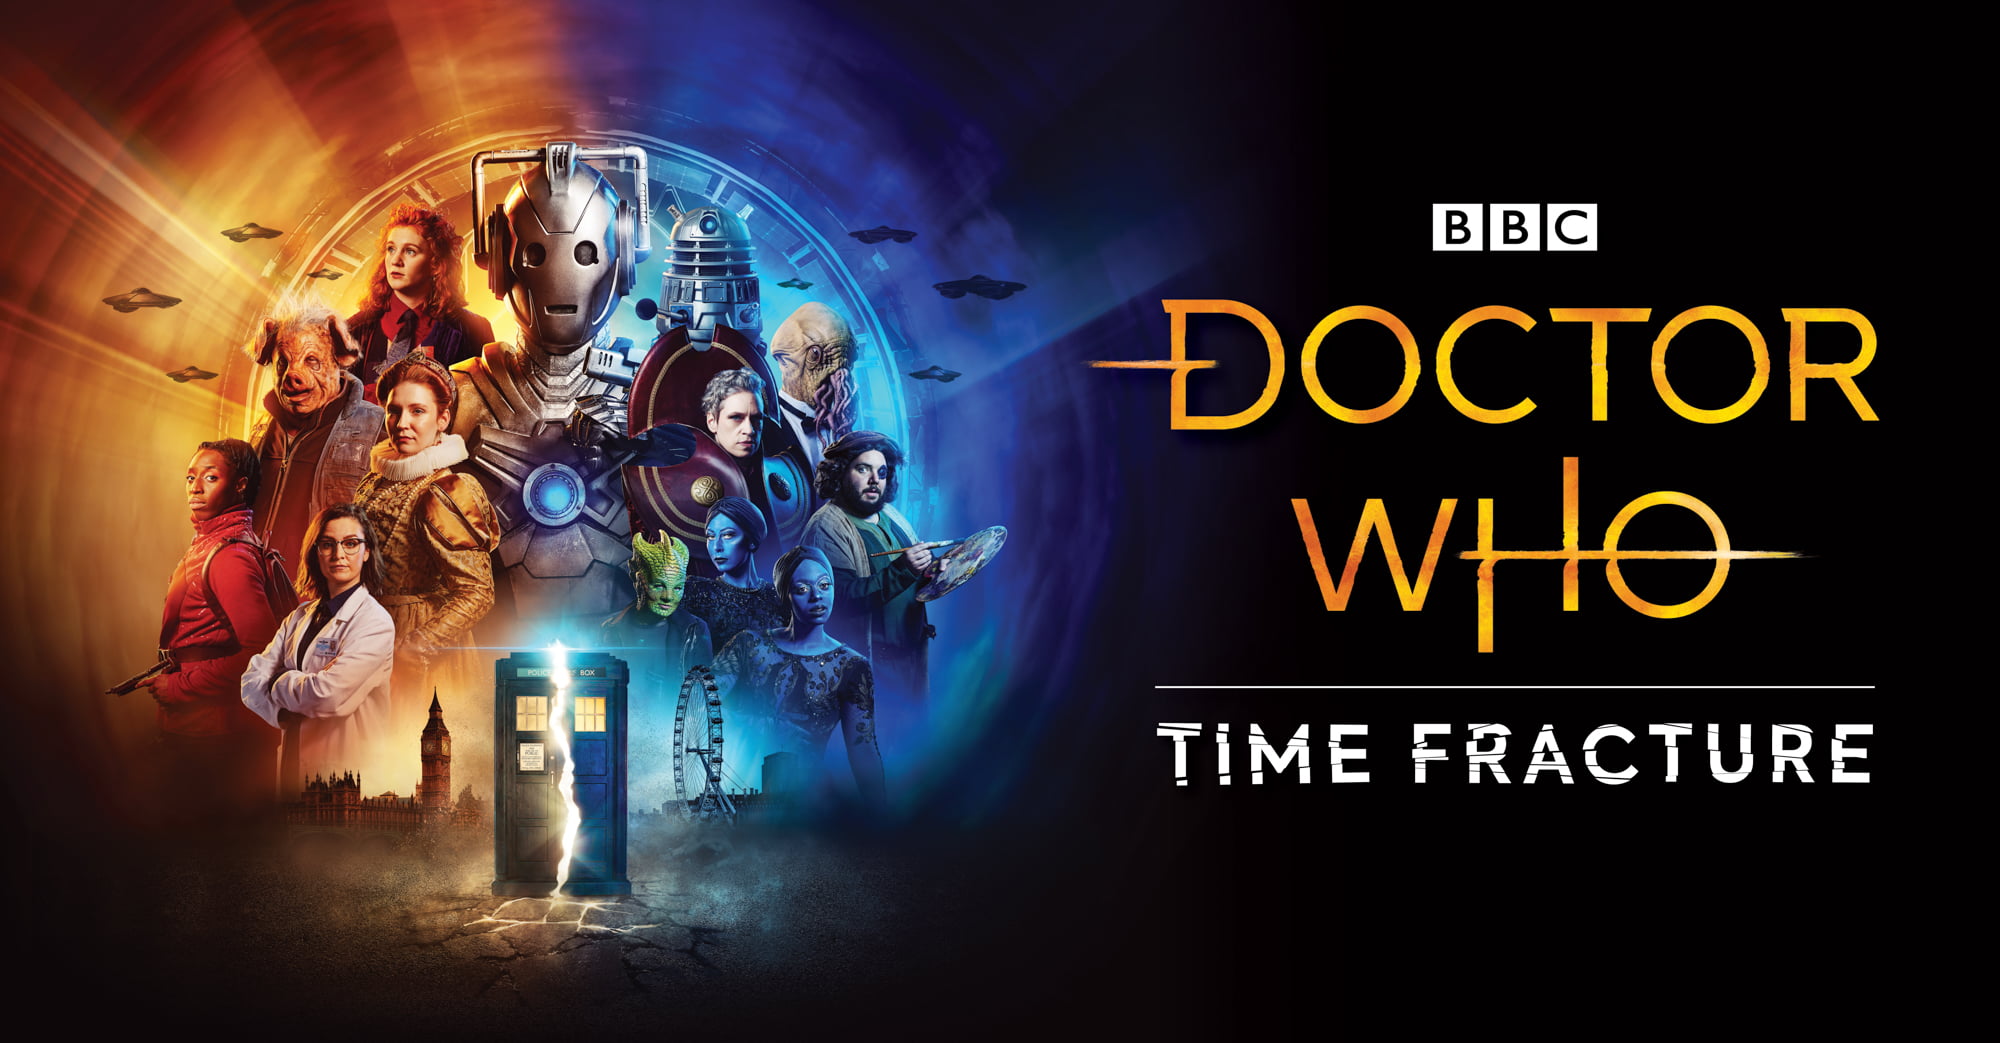 Character and key art for the Immersive Everywhere production of Doctor Who: Time Fracture.